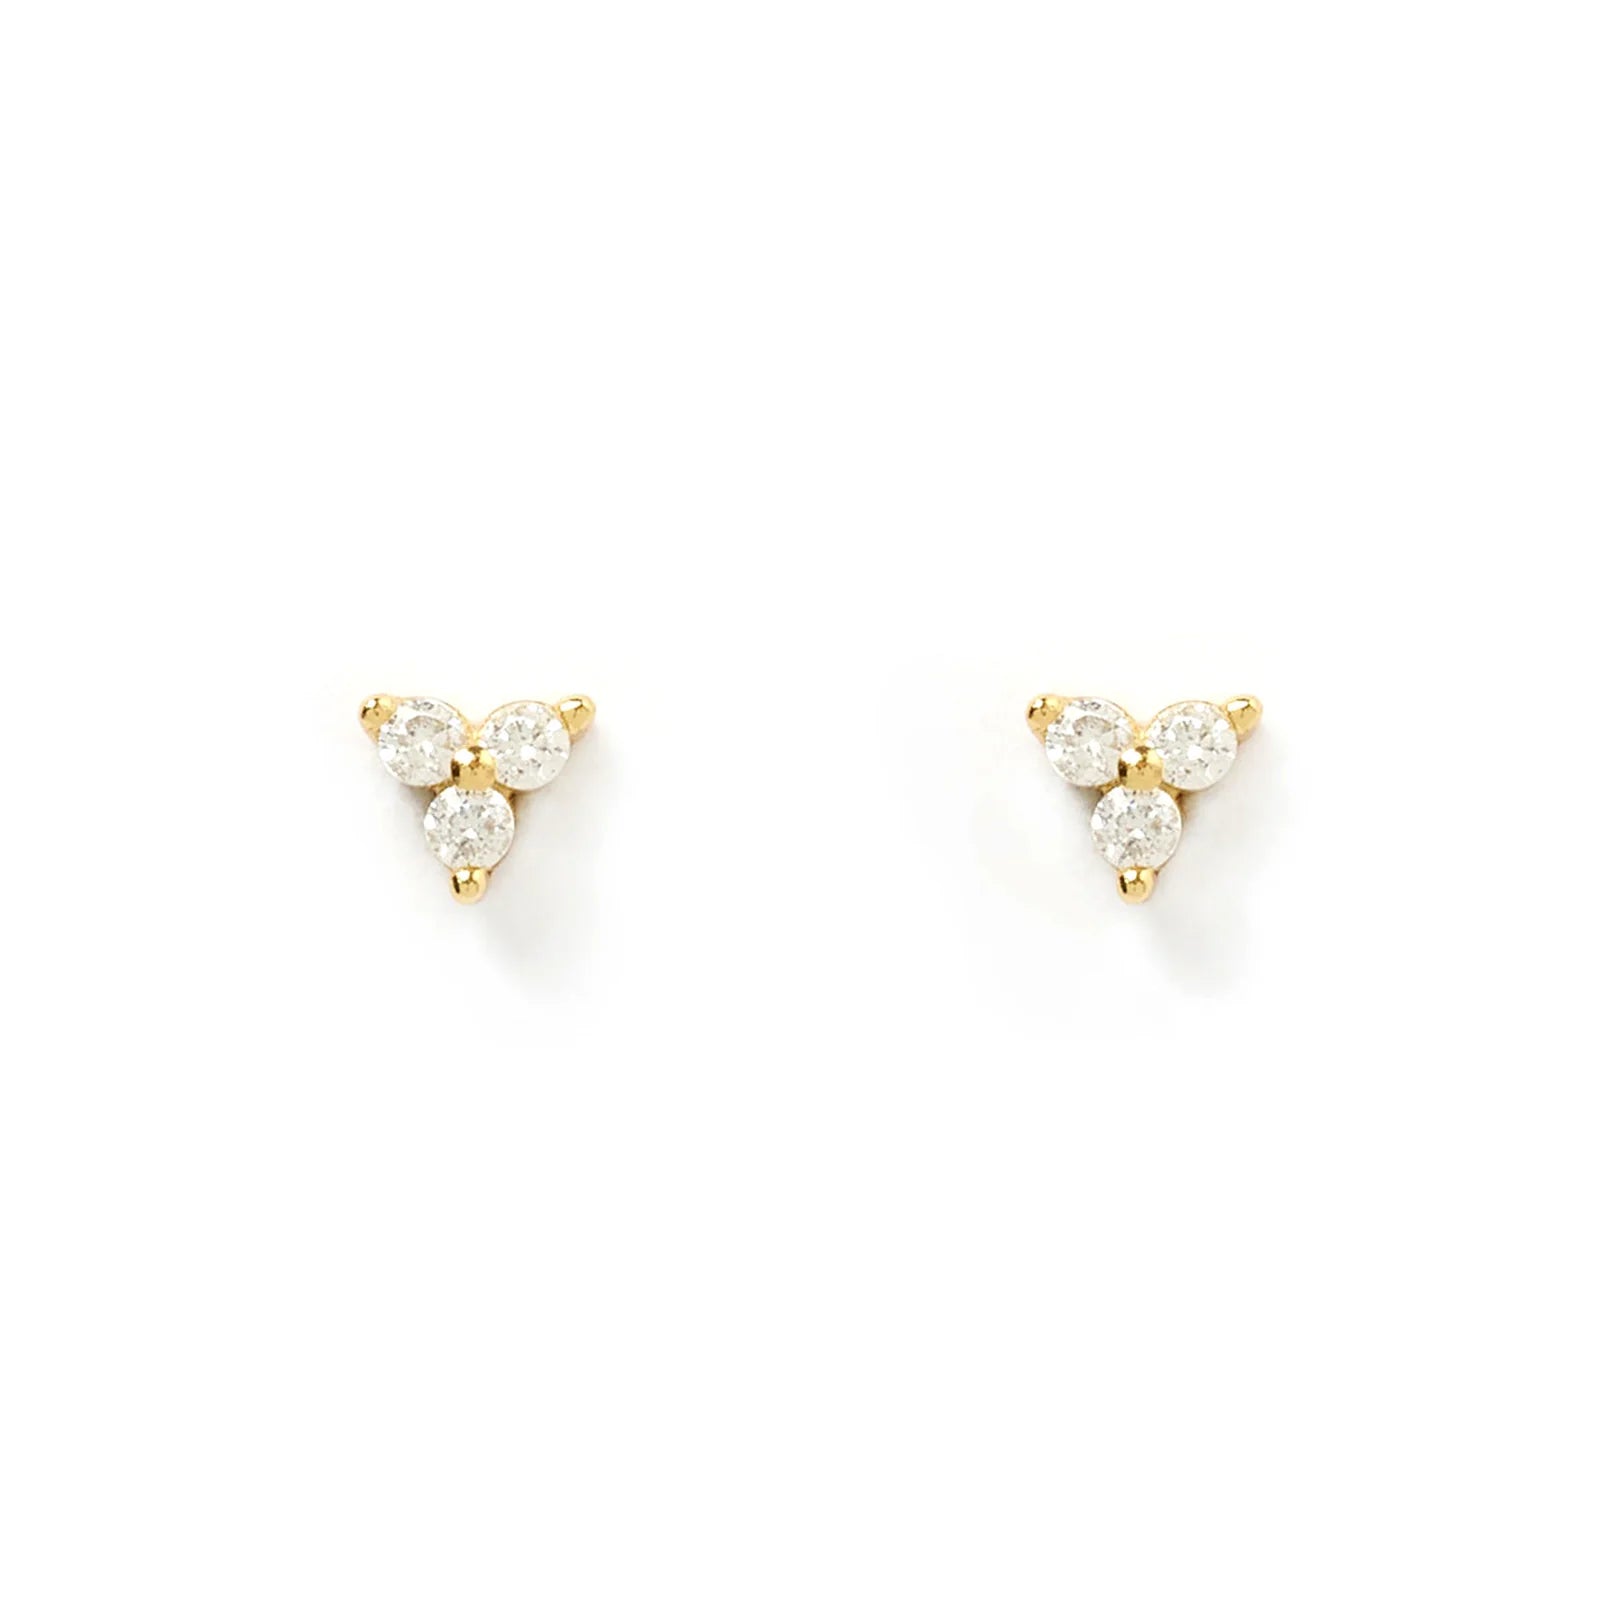 Cassia Stud Earrings - Stone by Arms of Eve